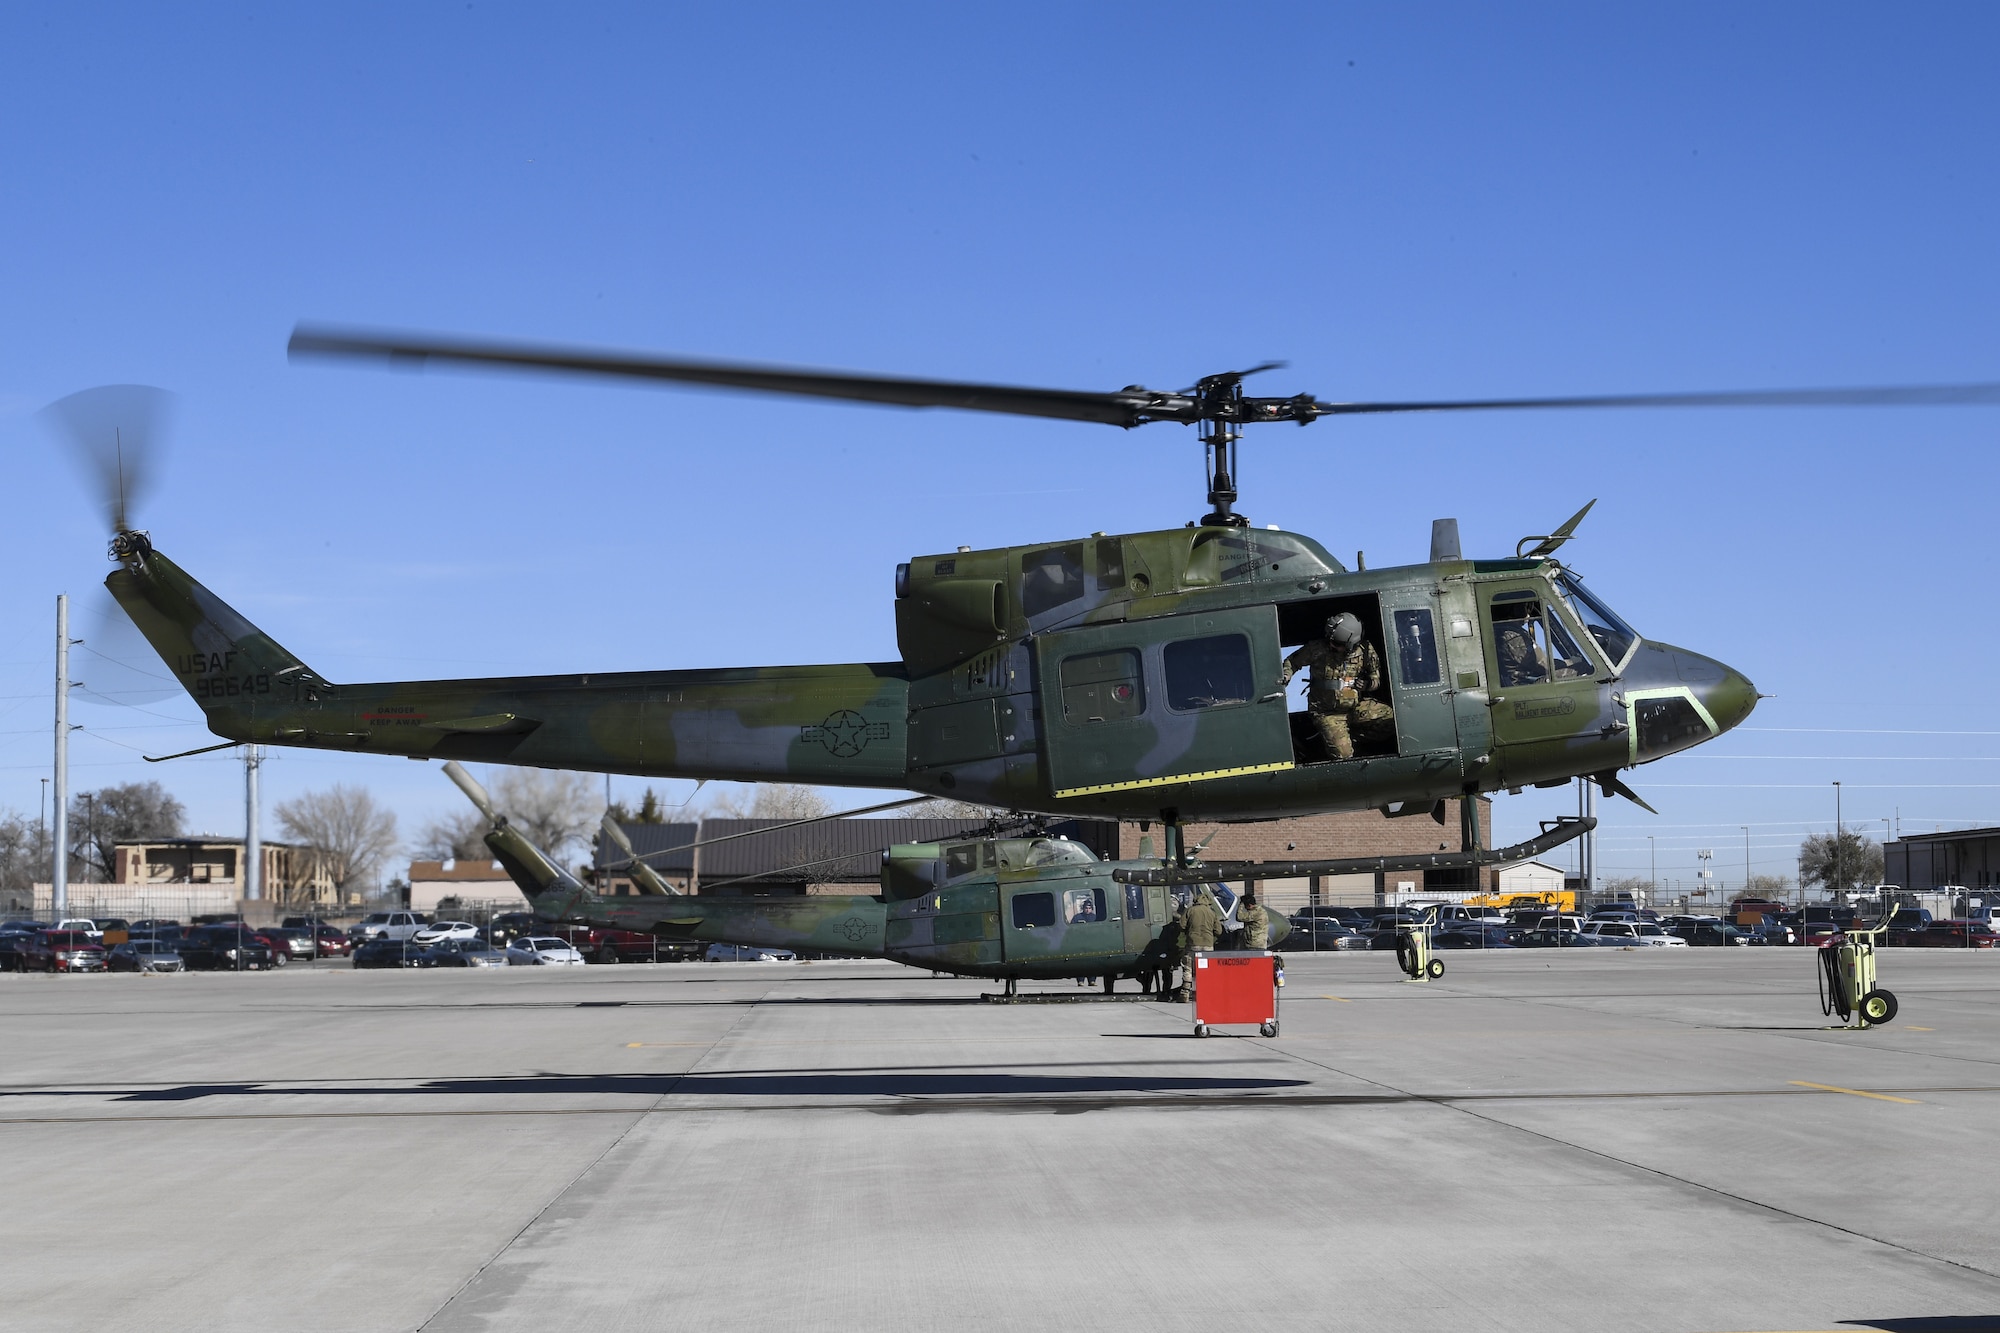 A UH-1N Huey with Maj. Gen. Mark E. Weatherington, Air Education and Training Command deputy commander, and crew members lifts-off the ground.